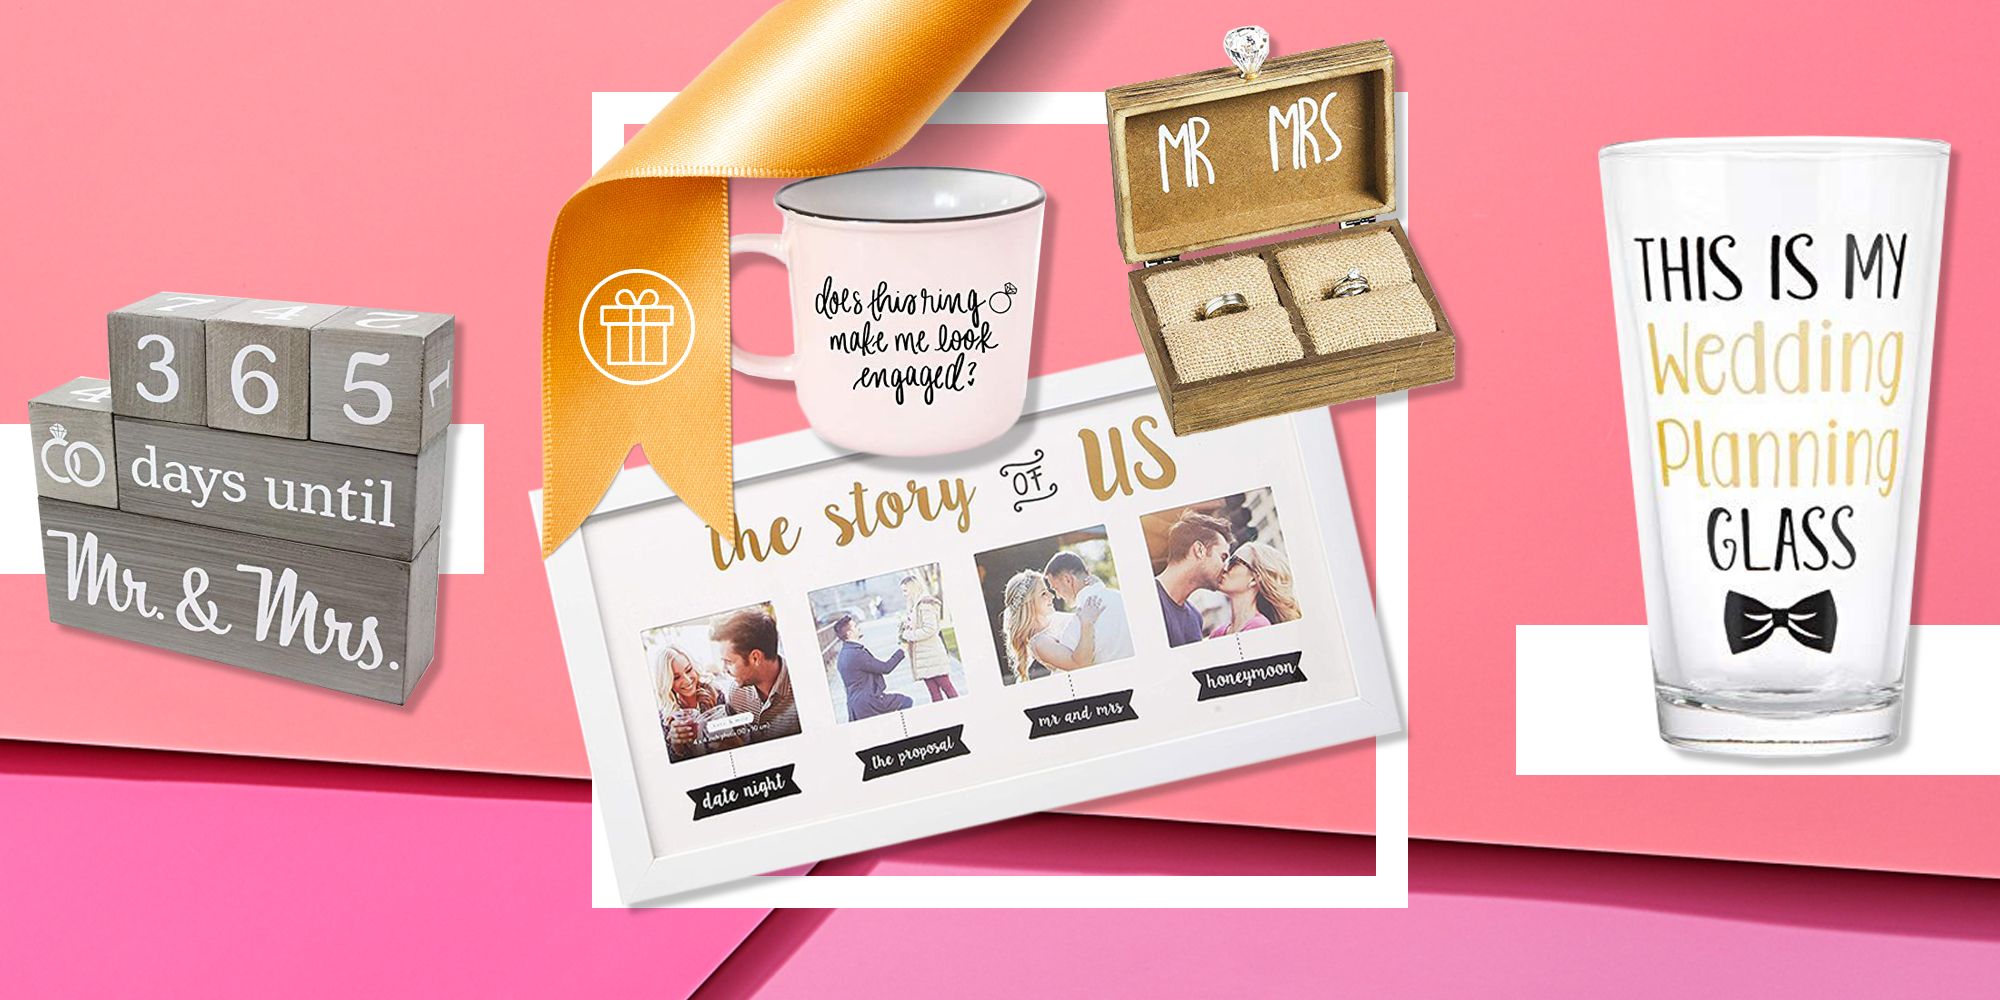 engagement gifts for her  25 great ideas about Engagement gifts on  Pinterest  Engagement party gifts Cheap bridal shower ideas Engagement  box